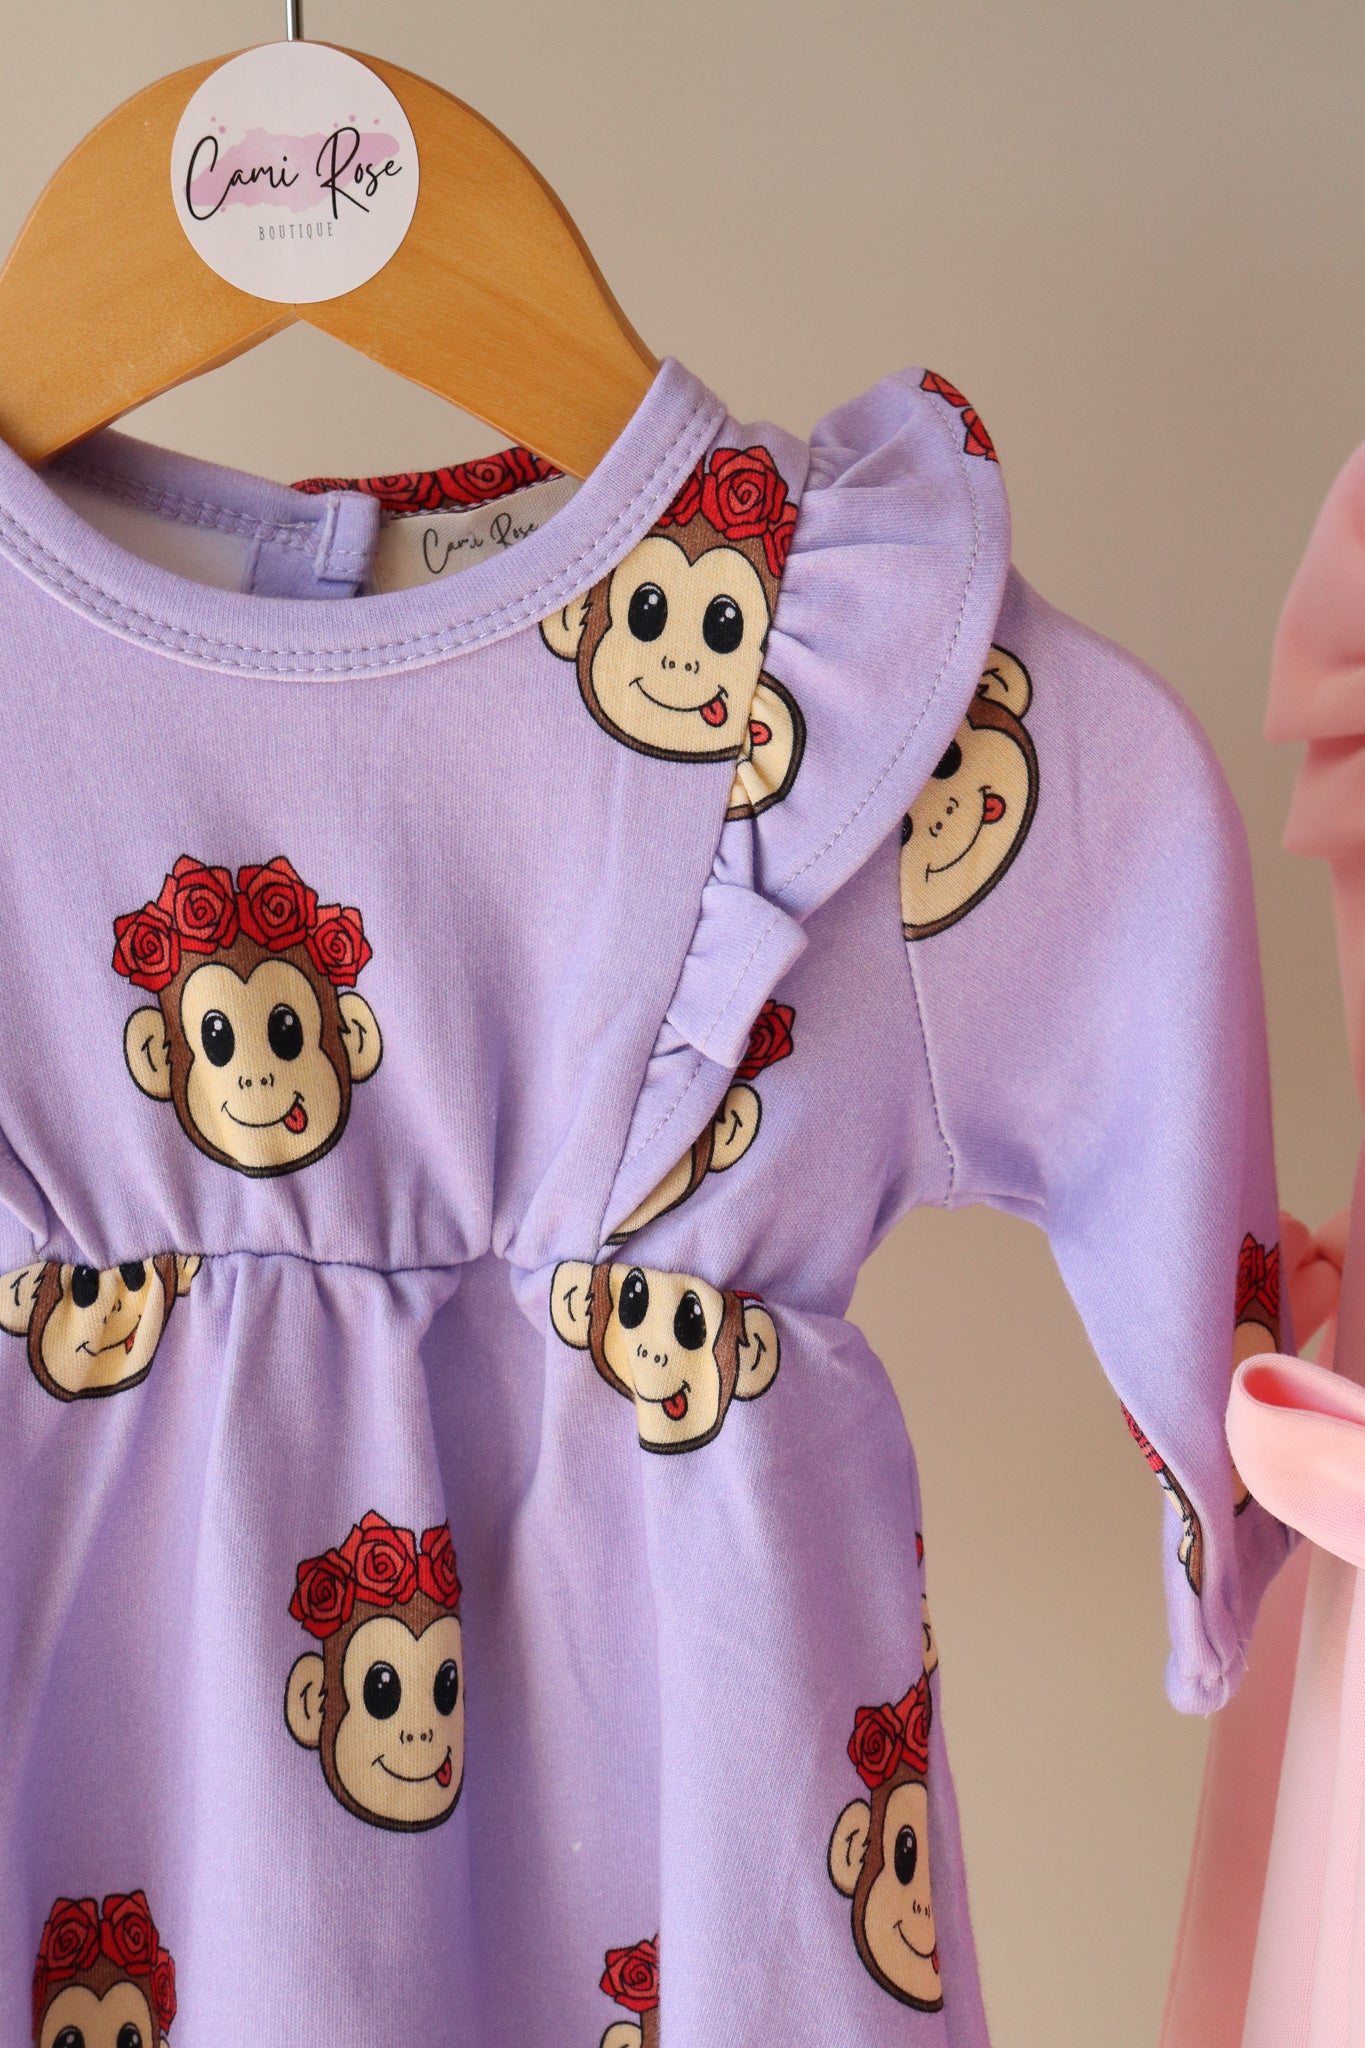 baby long sleeve dress in purple with frill sleeves and a cute monkey design printed all over